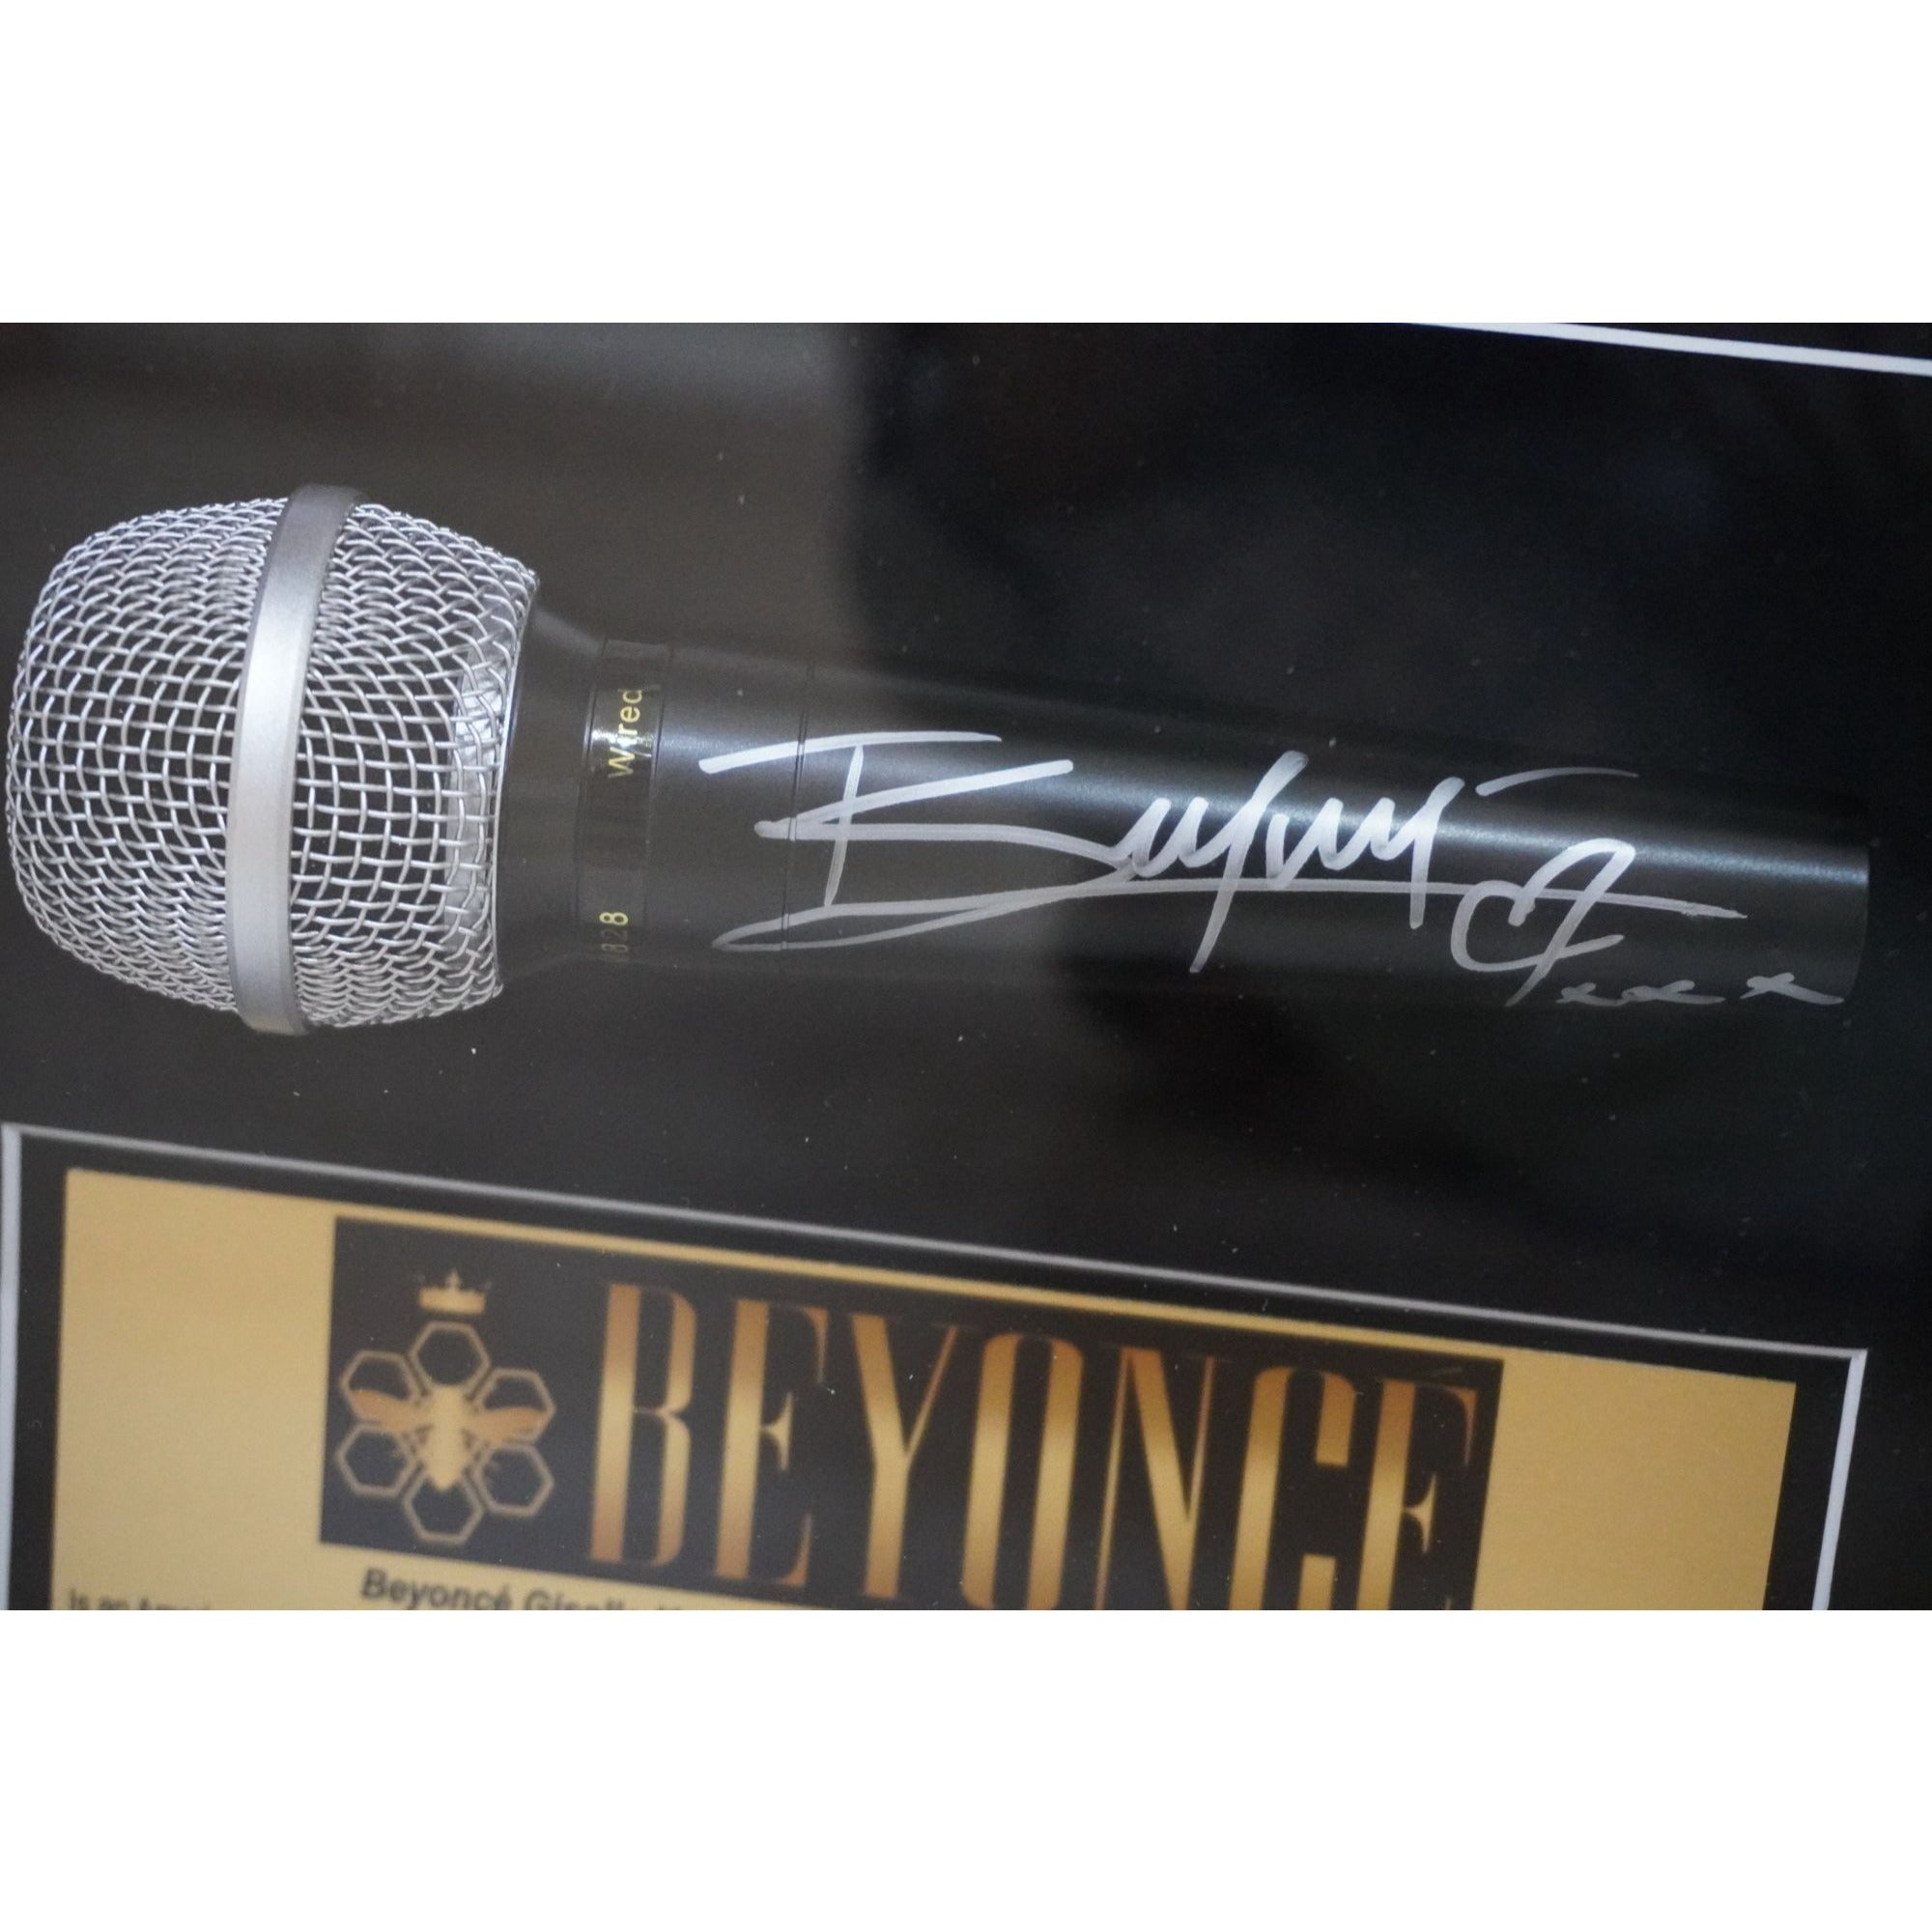 Beyoncé Knowles microphone One of a Kind signed and framed with proof